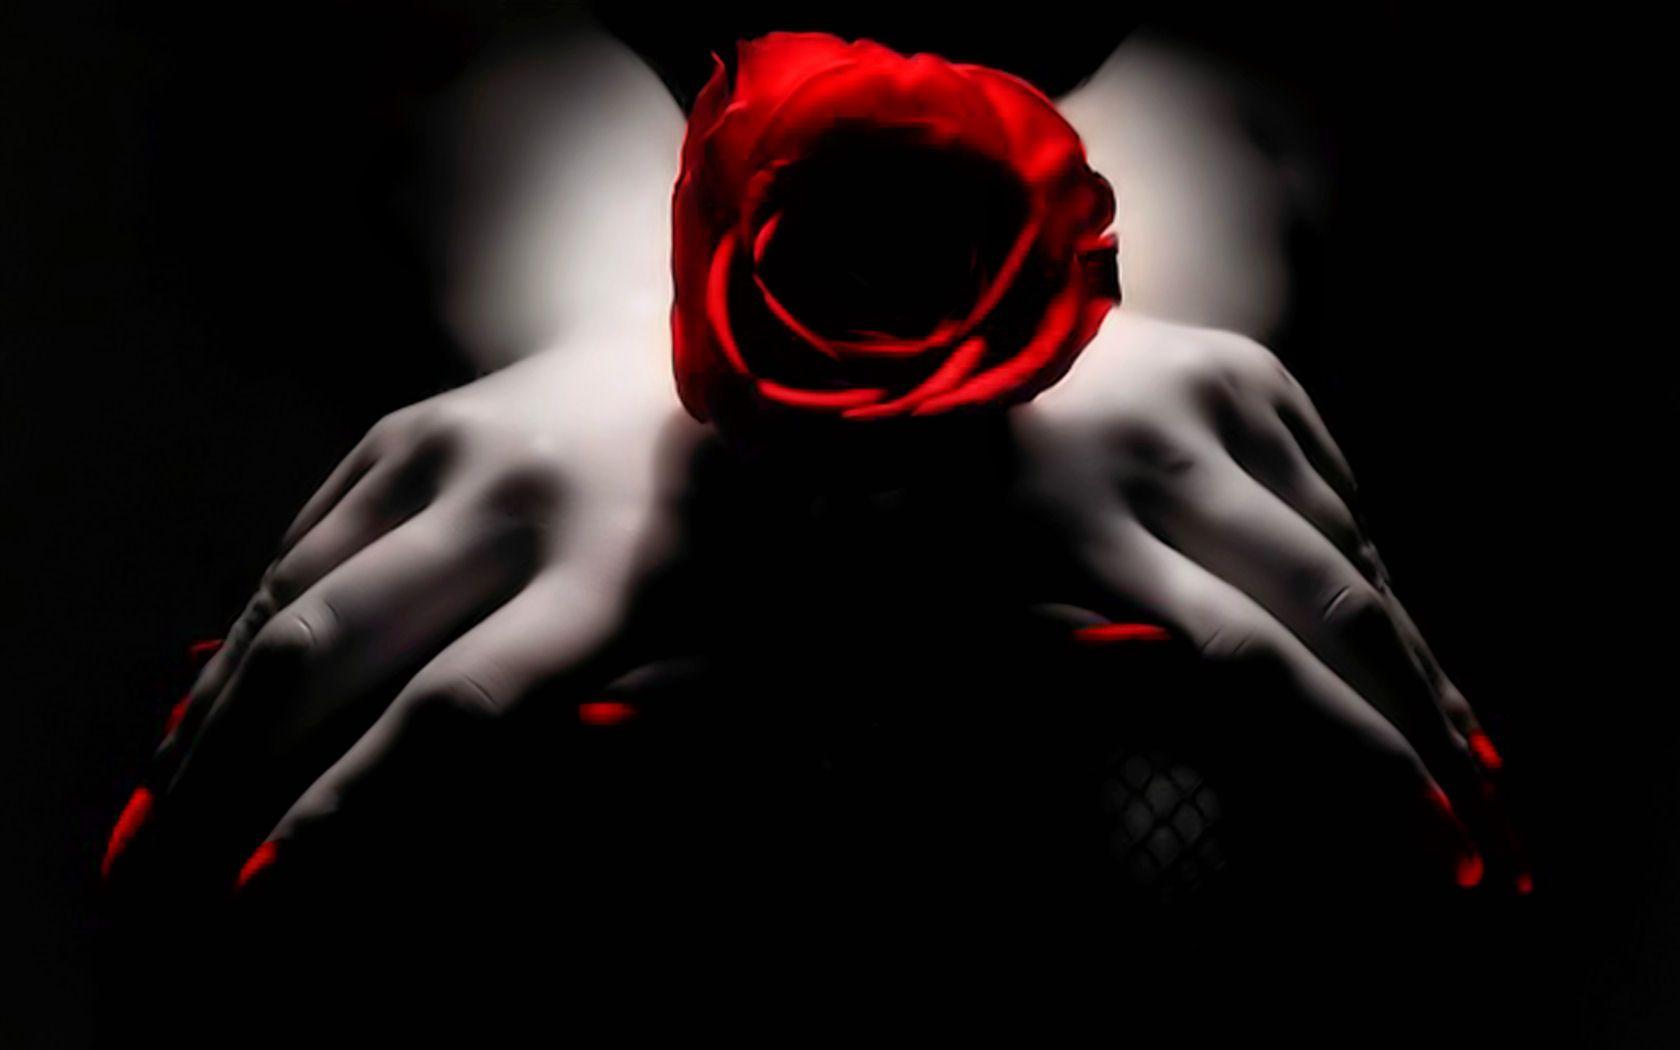 Black white and red roses fower red nails full HD abstract high